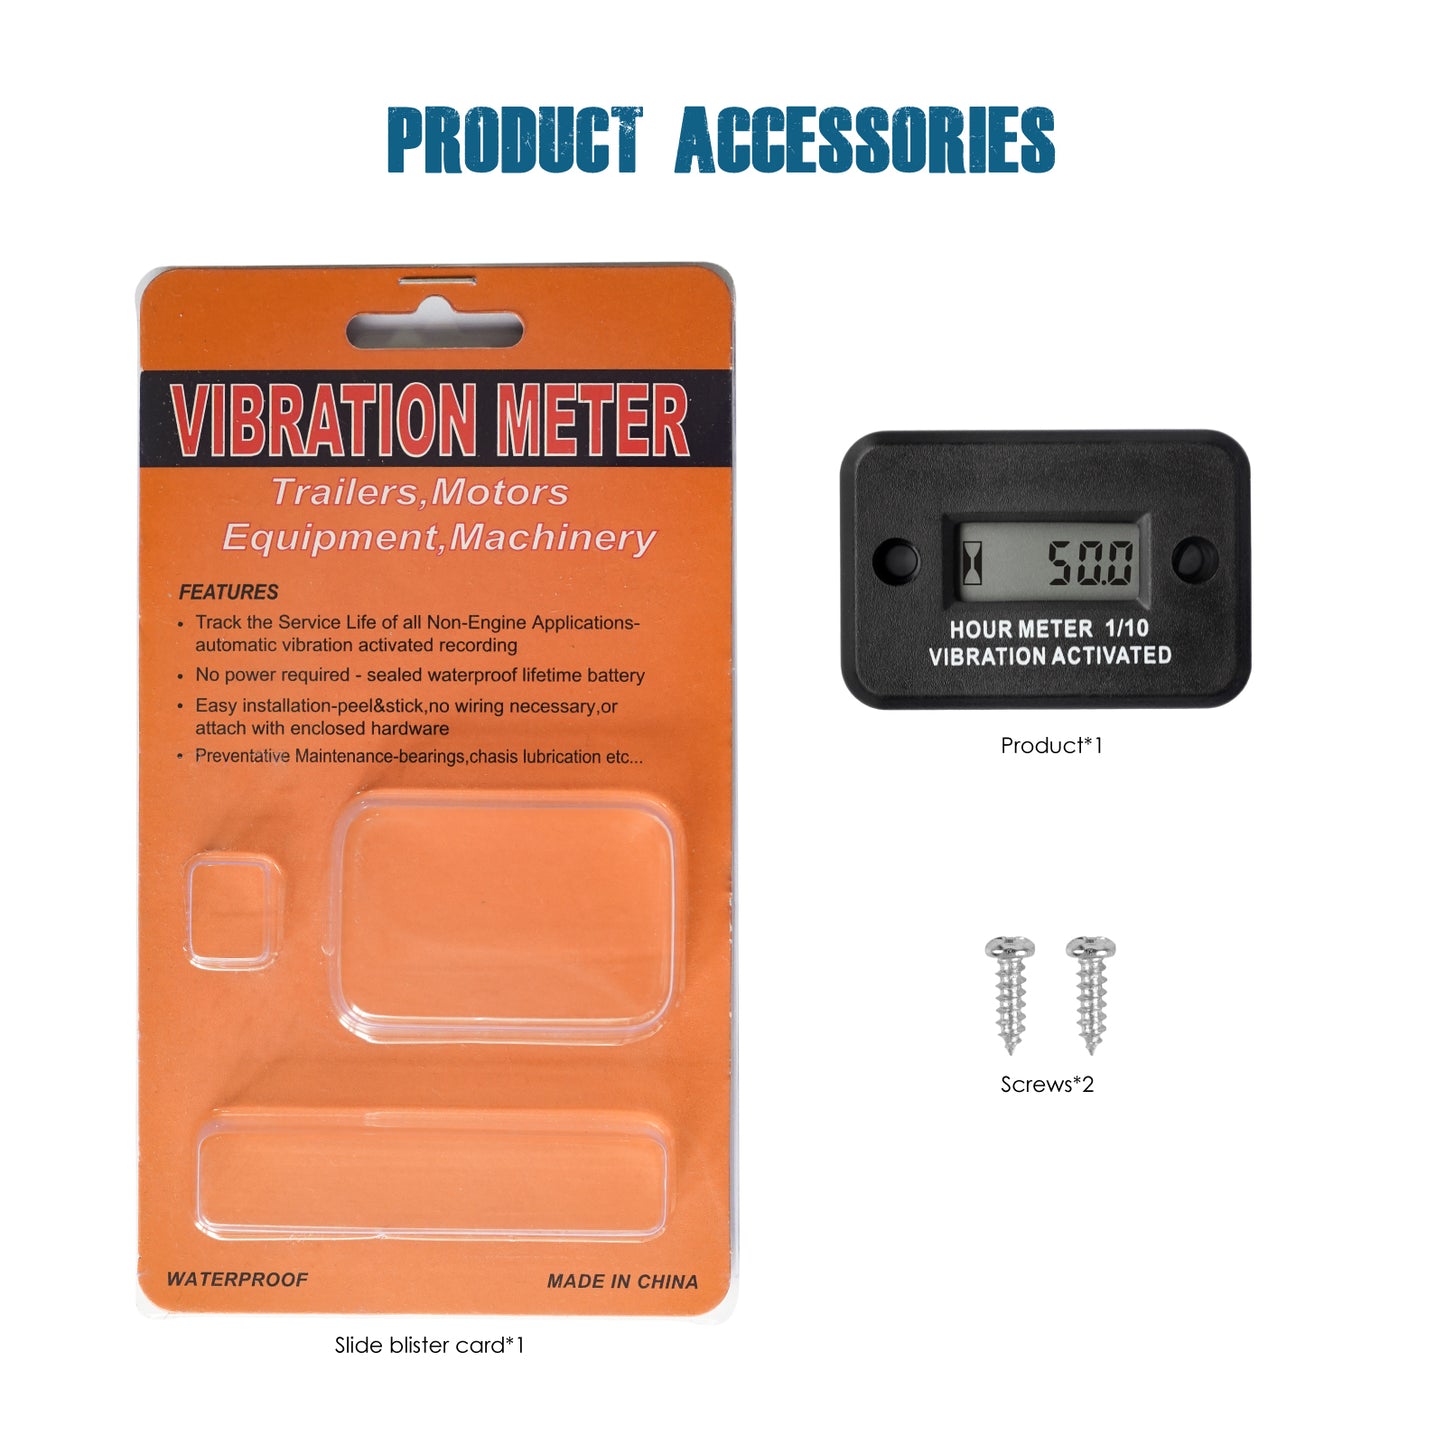 Runleader Digital Wireless Vibration Activated Hour Meter TOT Hours Record, Waterproof Design, Applicable to All Types of Lawn Mower Generator